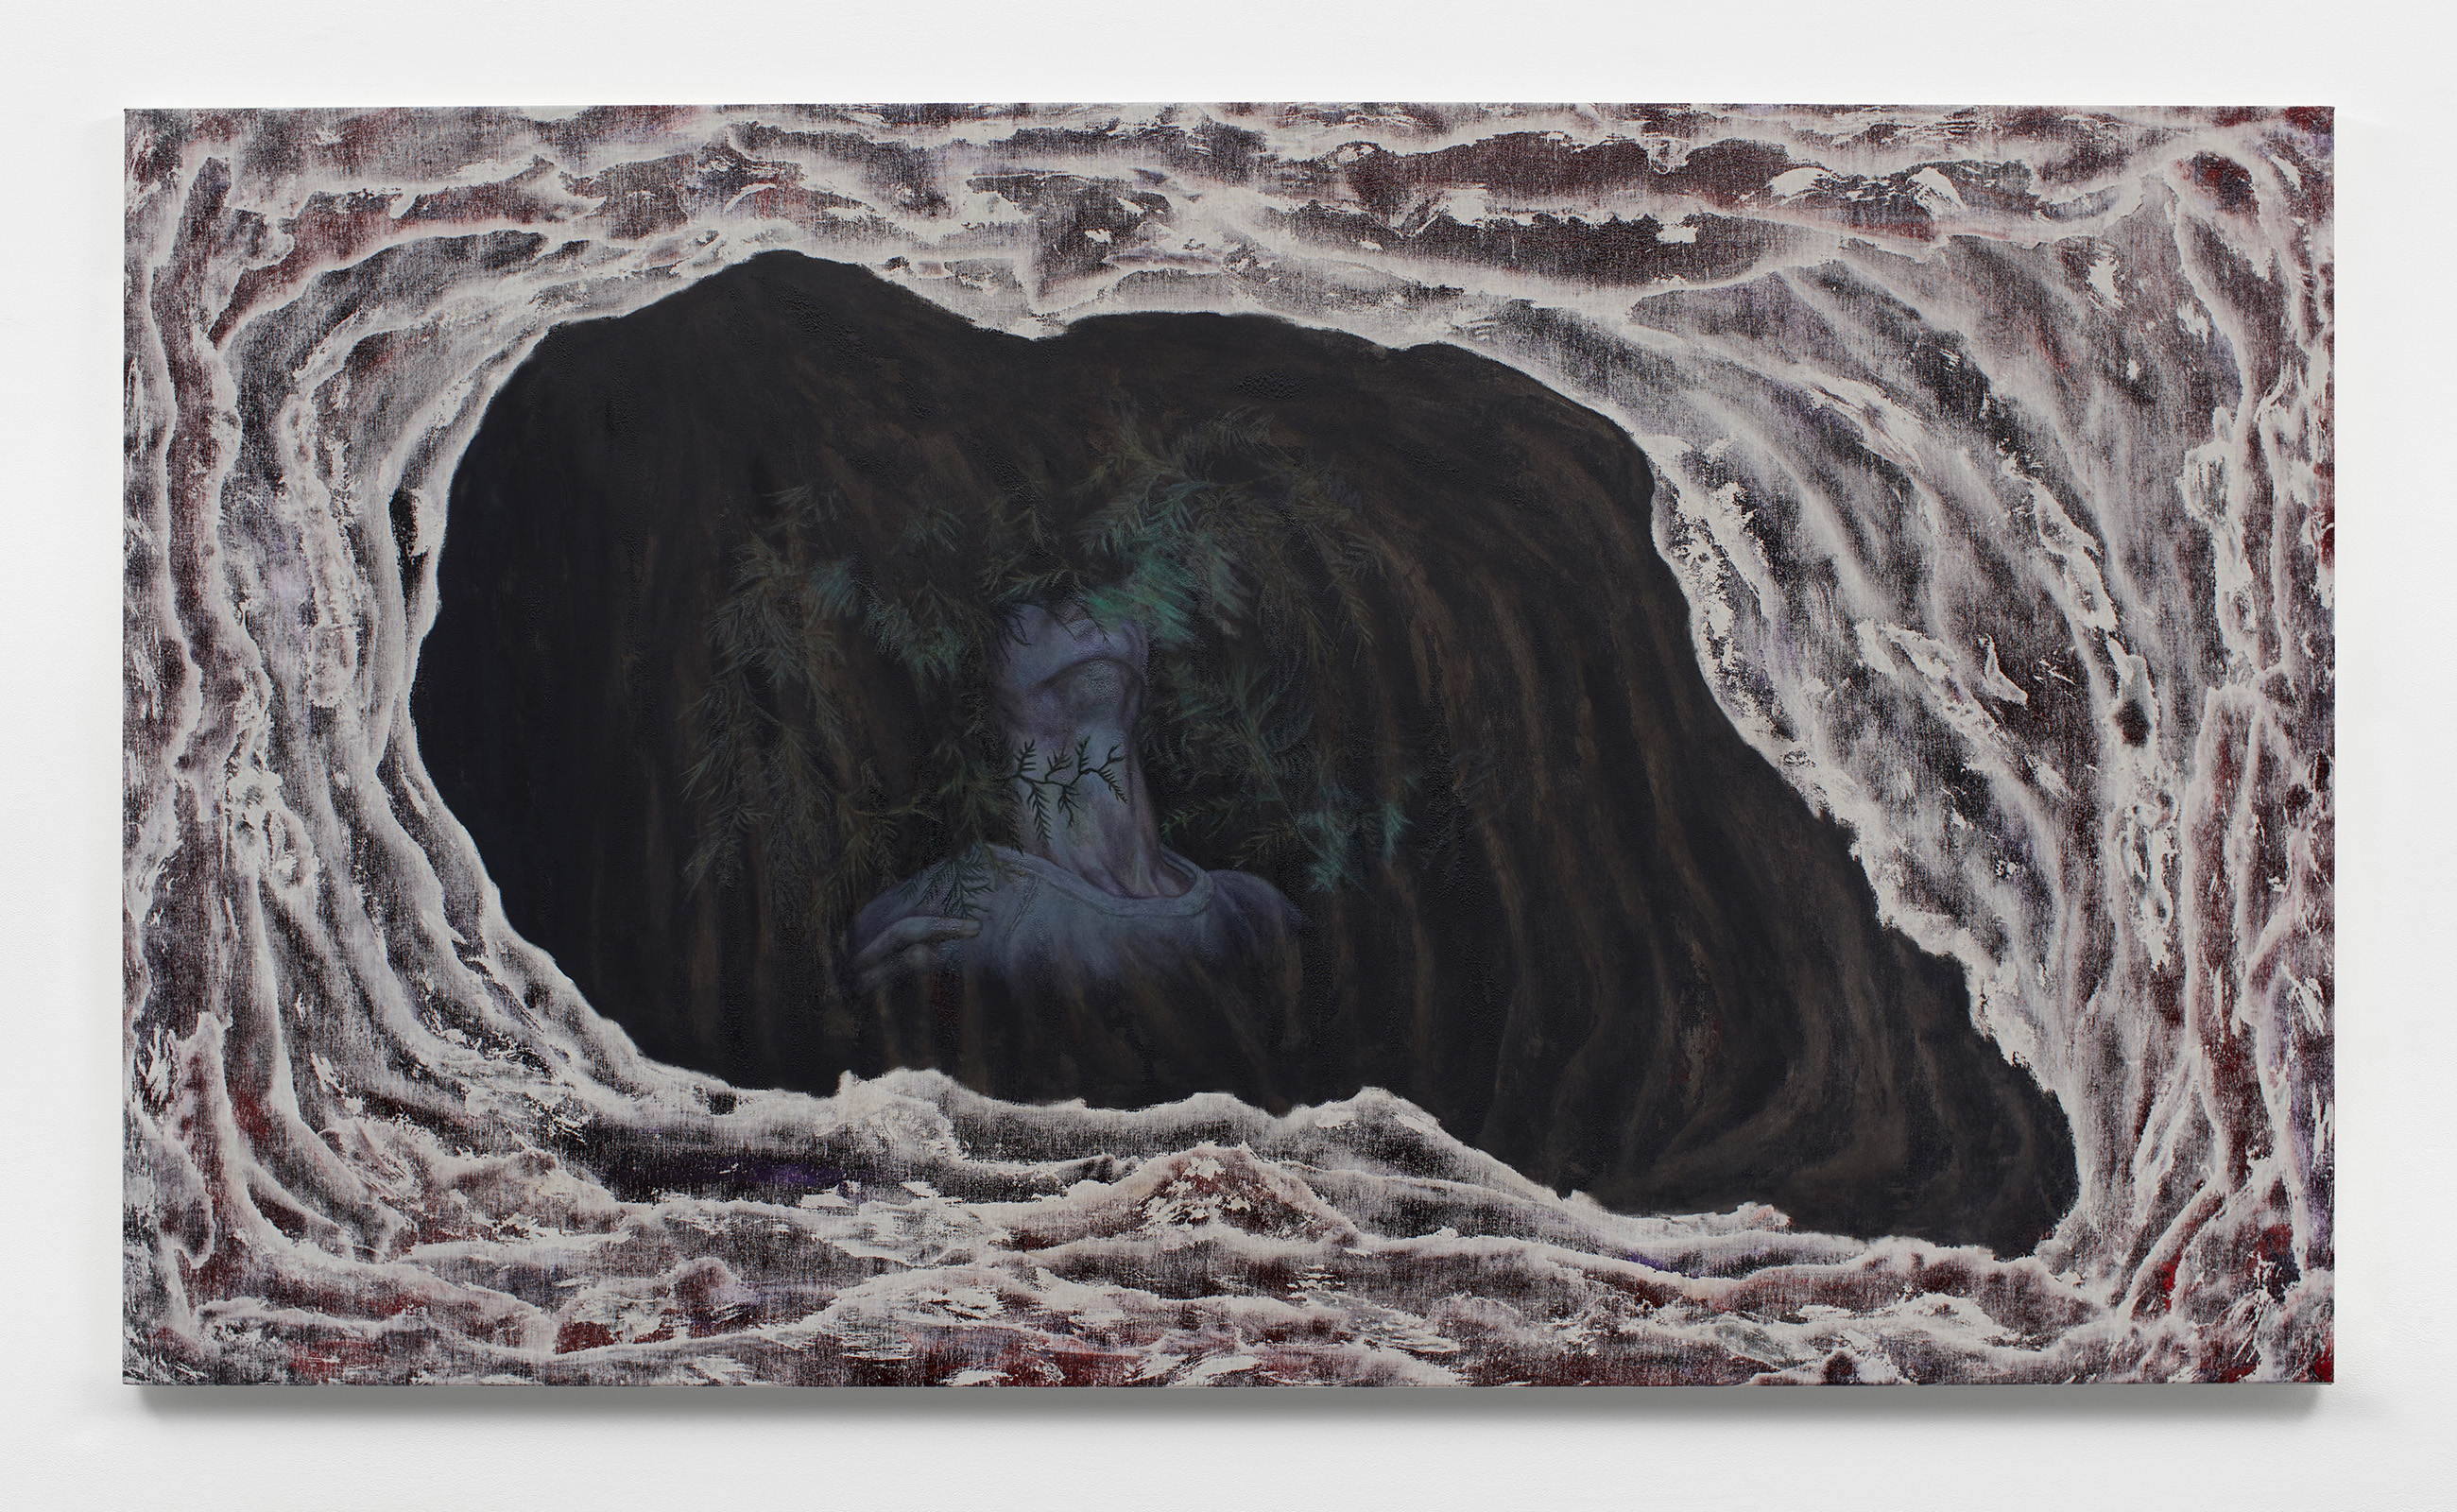 Michael Ho, Dream of (Erosion), 2023, oil and acrylic on canvas, 130 x 225 cm, 51 1/8 x 88 5/8 in.